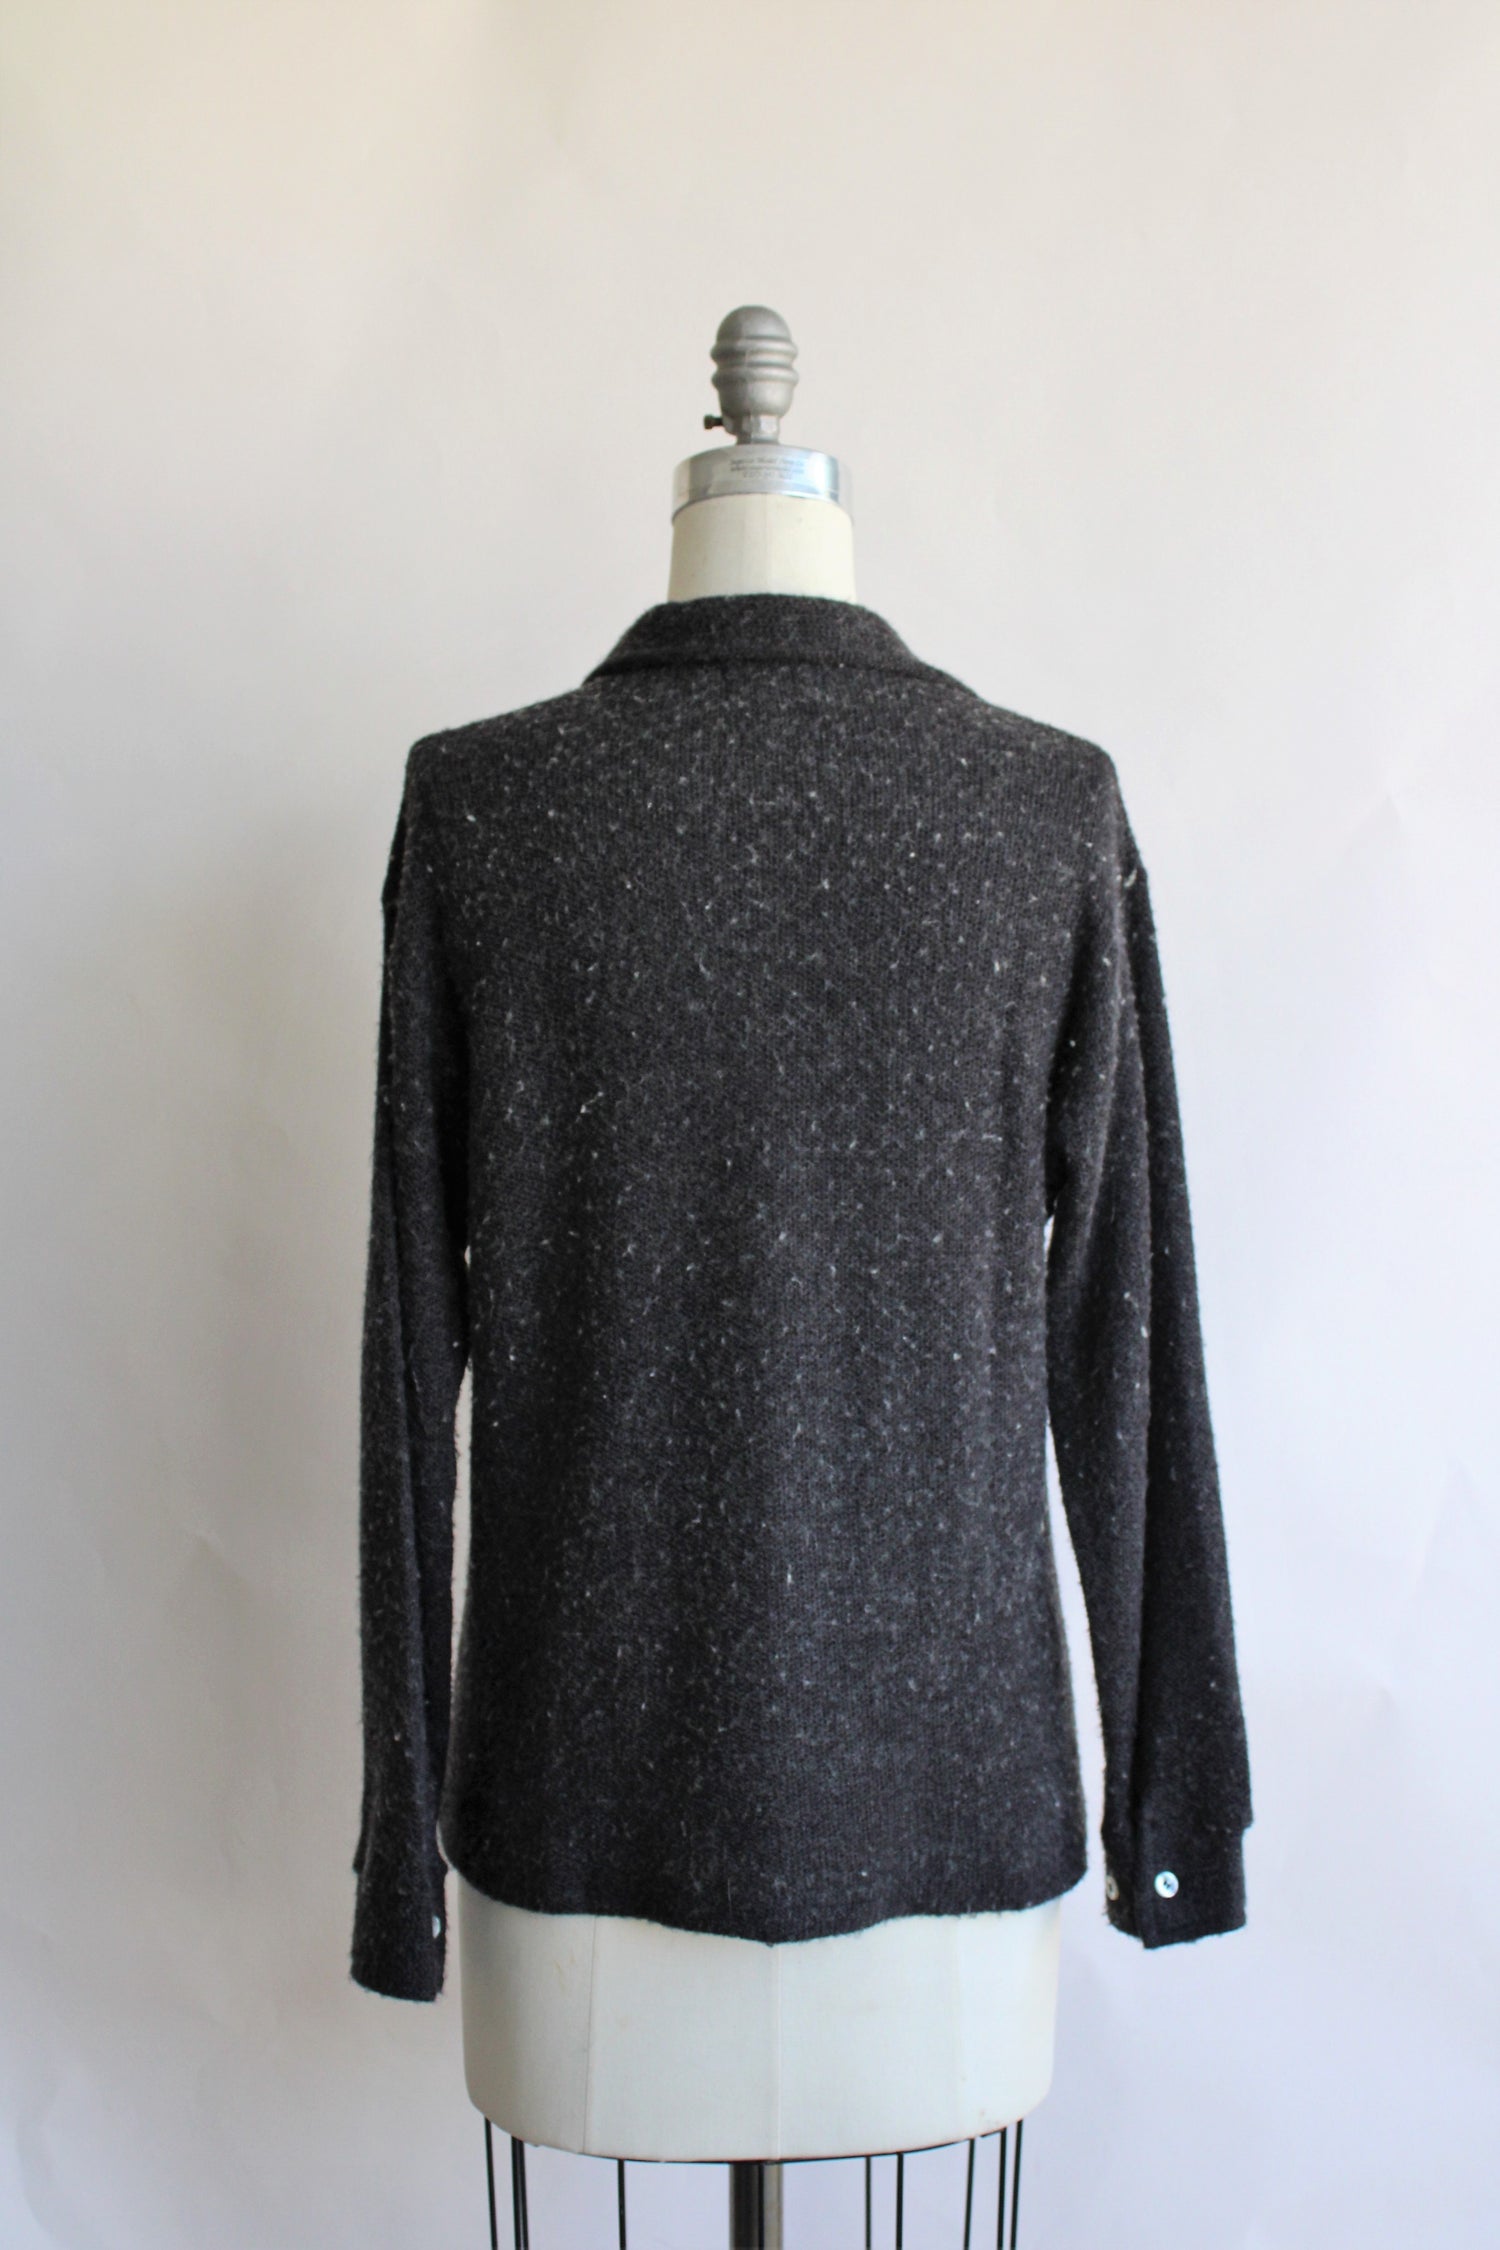 Vintage 1950s 1960s Charcoal Gray Hathaway Sweater